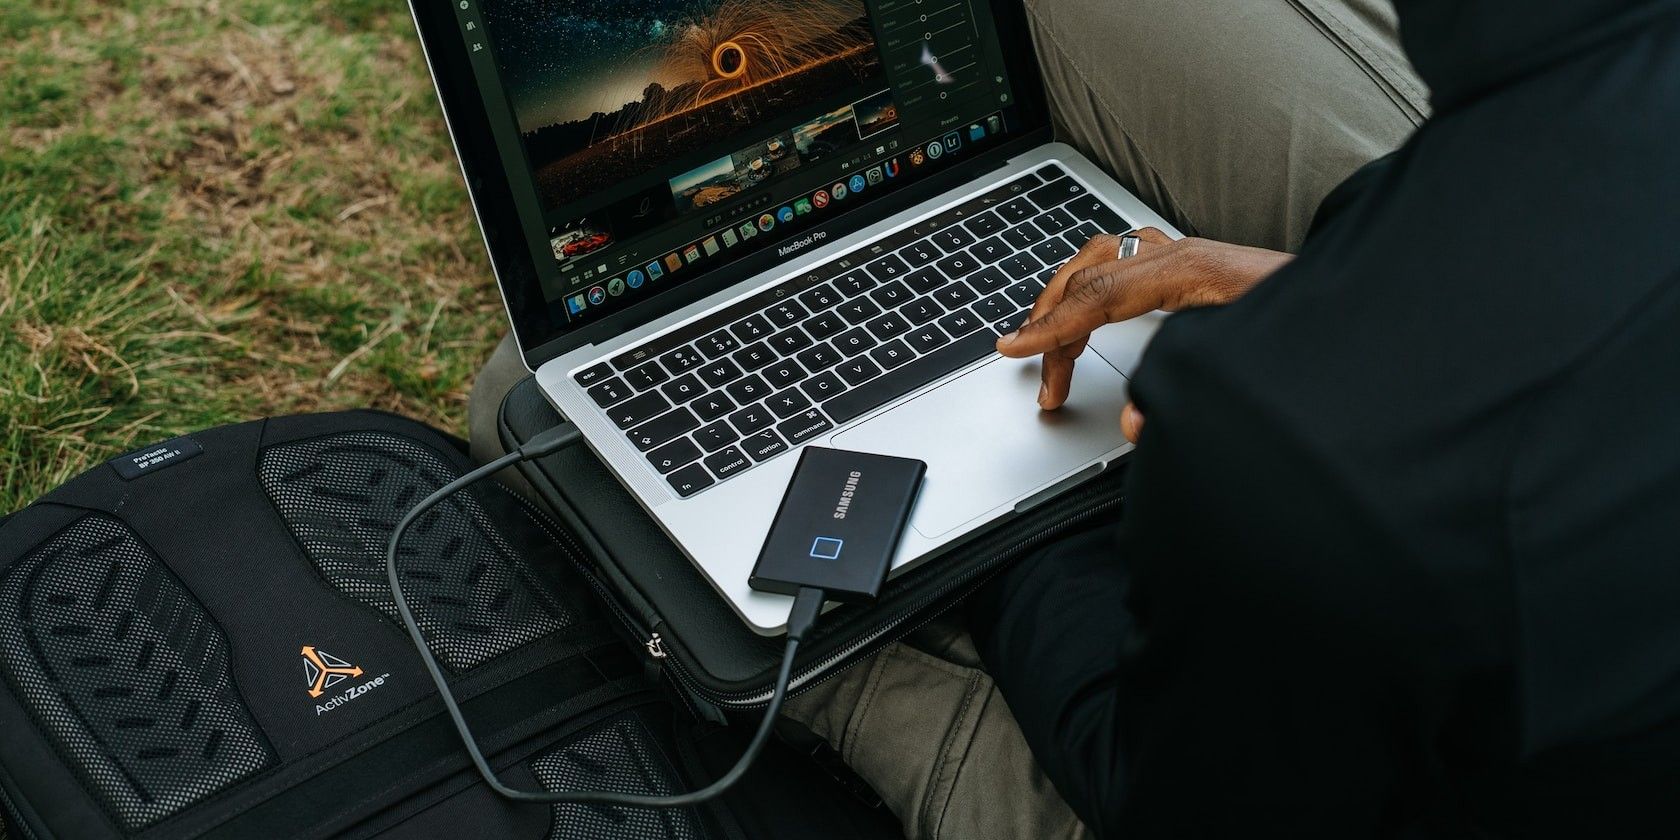 Man outside using a macbook and external SSD